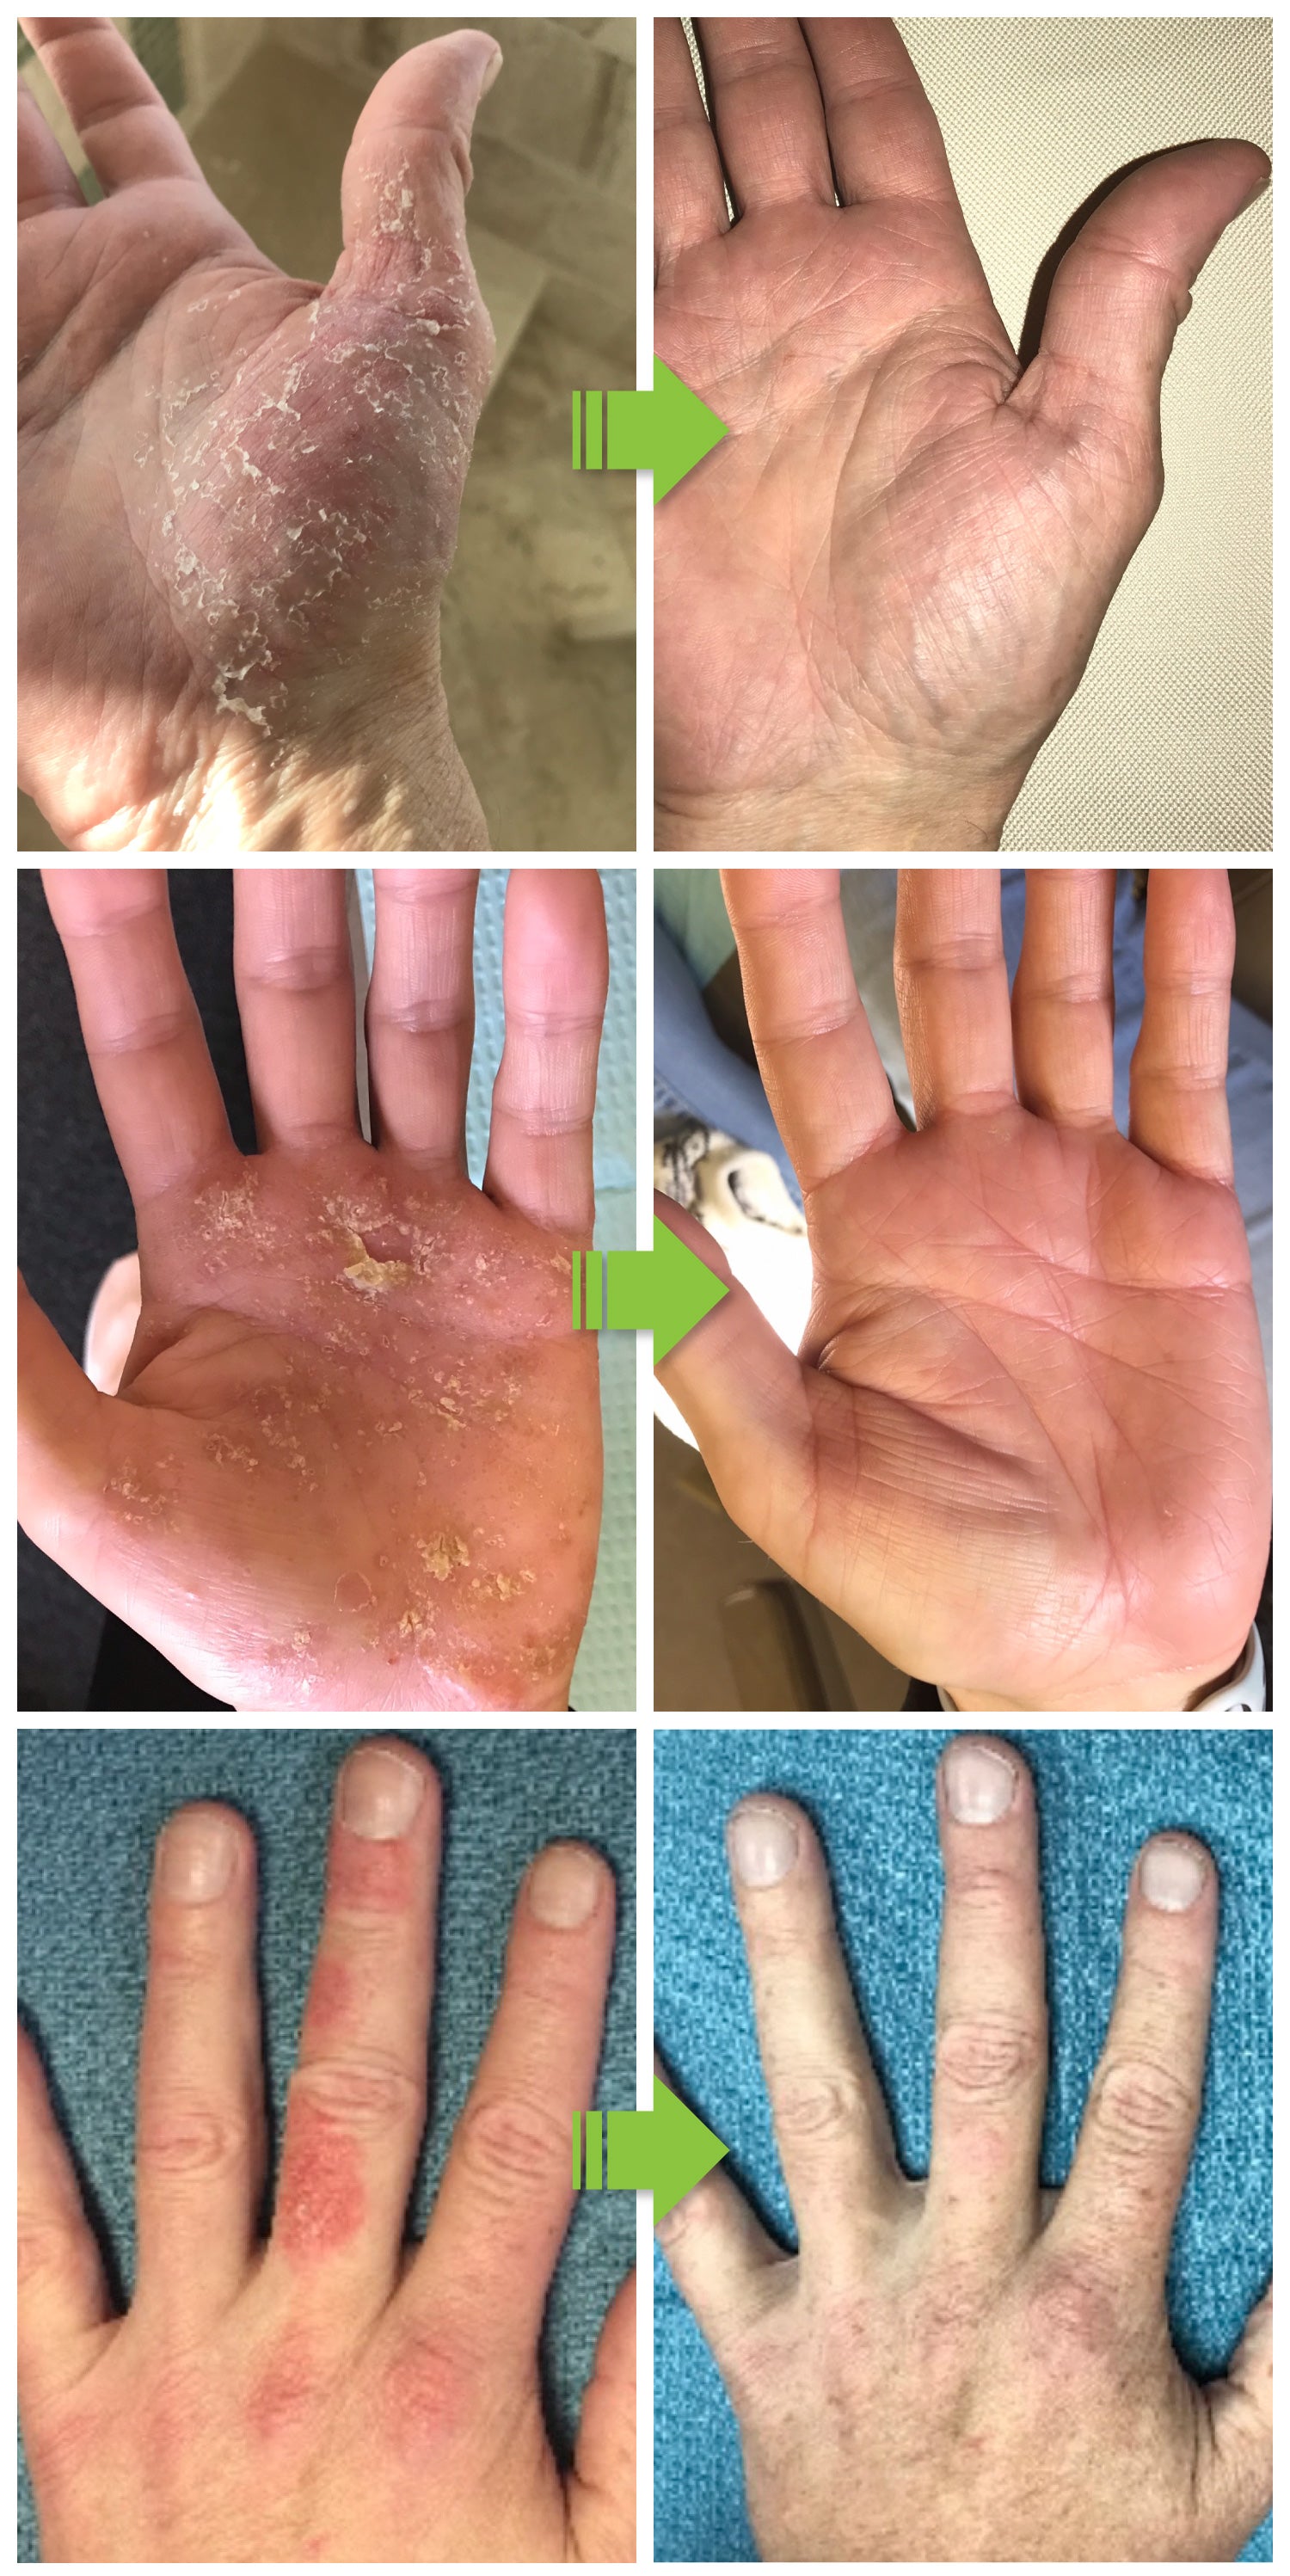 Amazing results from using Eczema Flare Wipes.